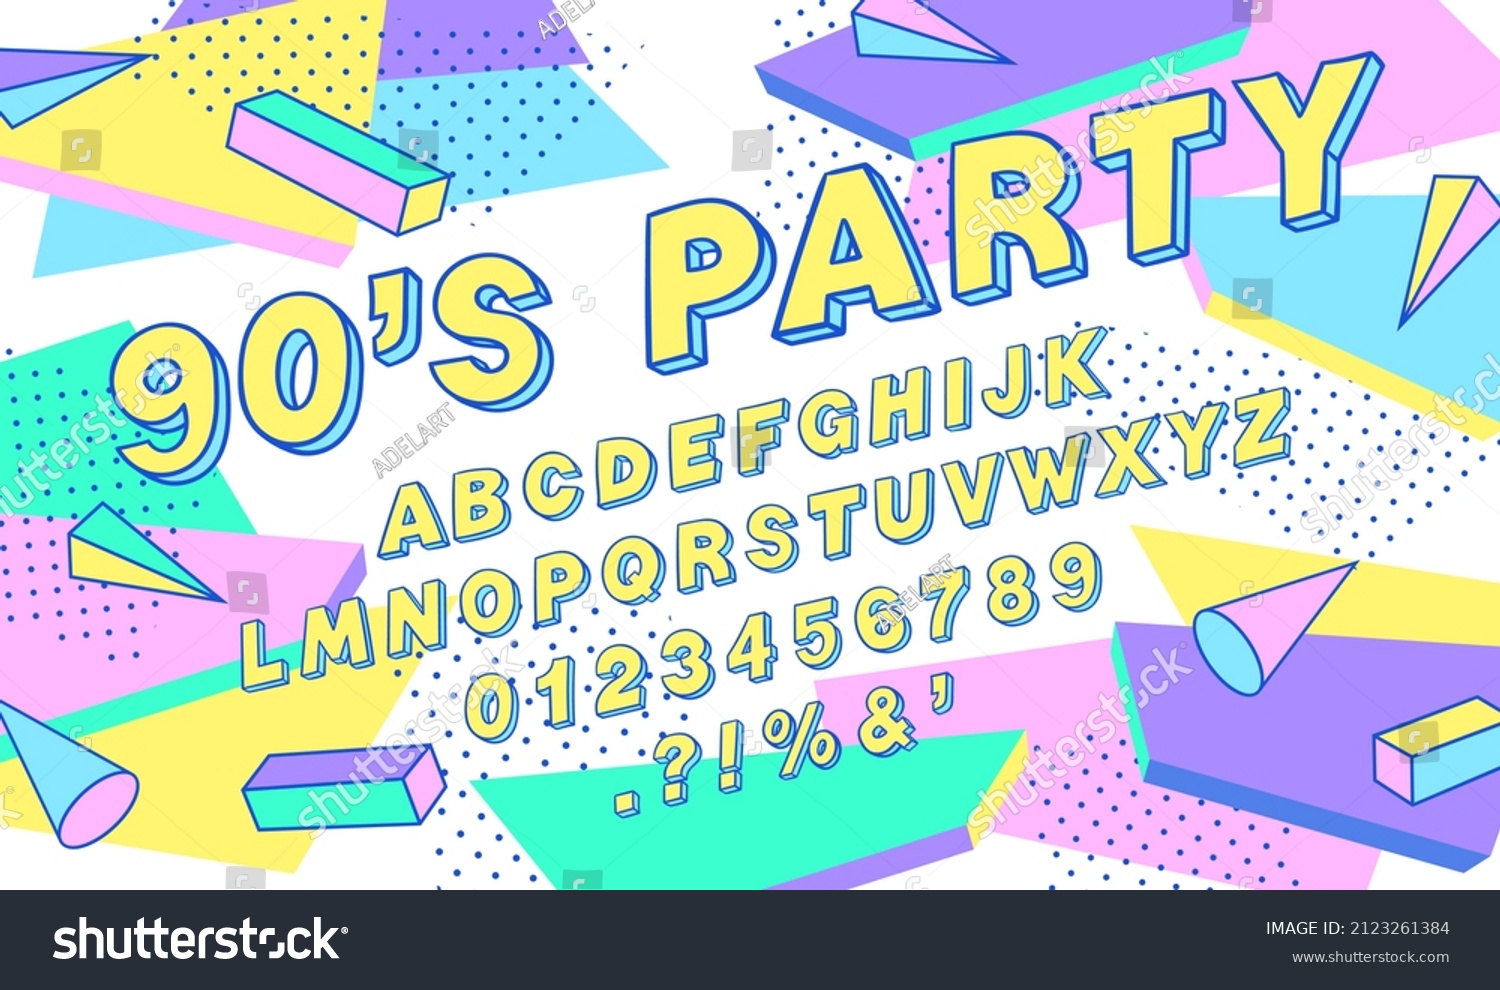 90s Style Font Alphabet Doodle Font Colorful Royalty Free Stock